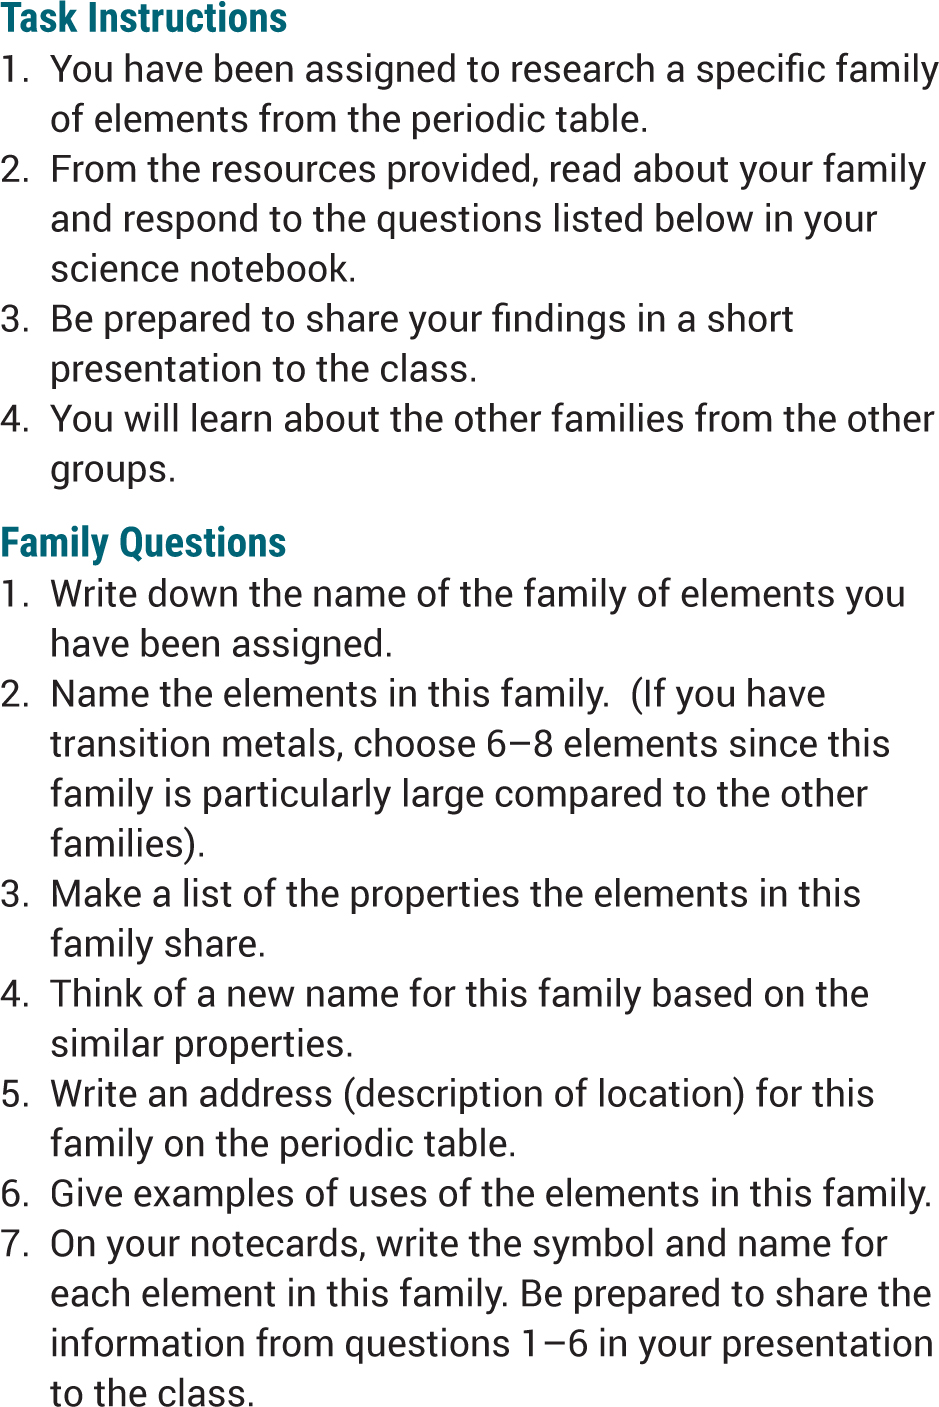 Families of the periodic table jigsaw task card.